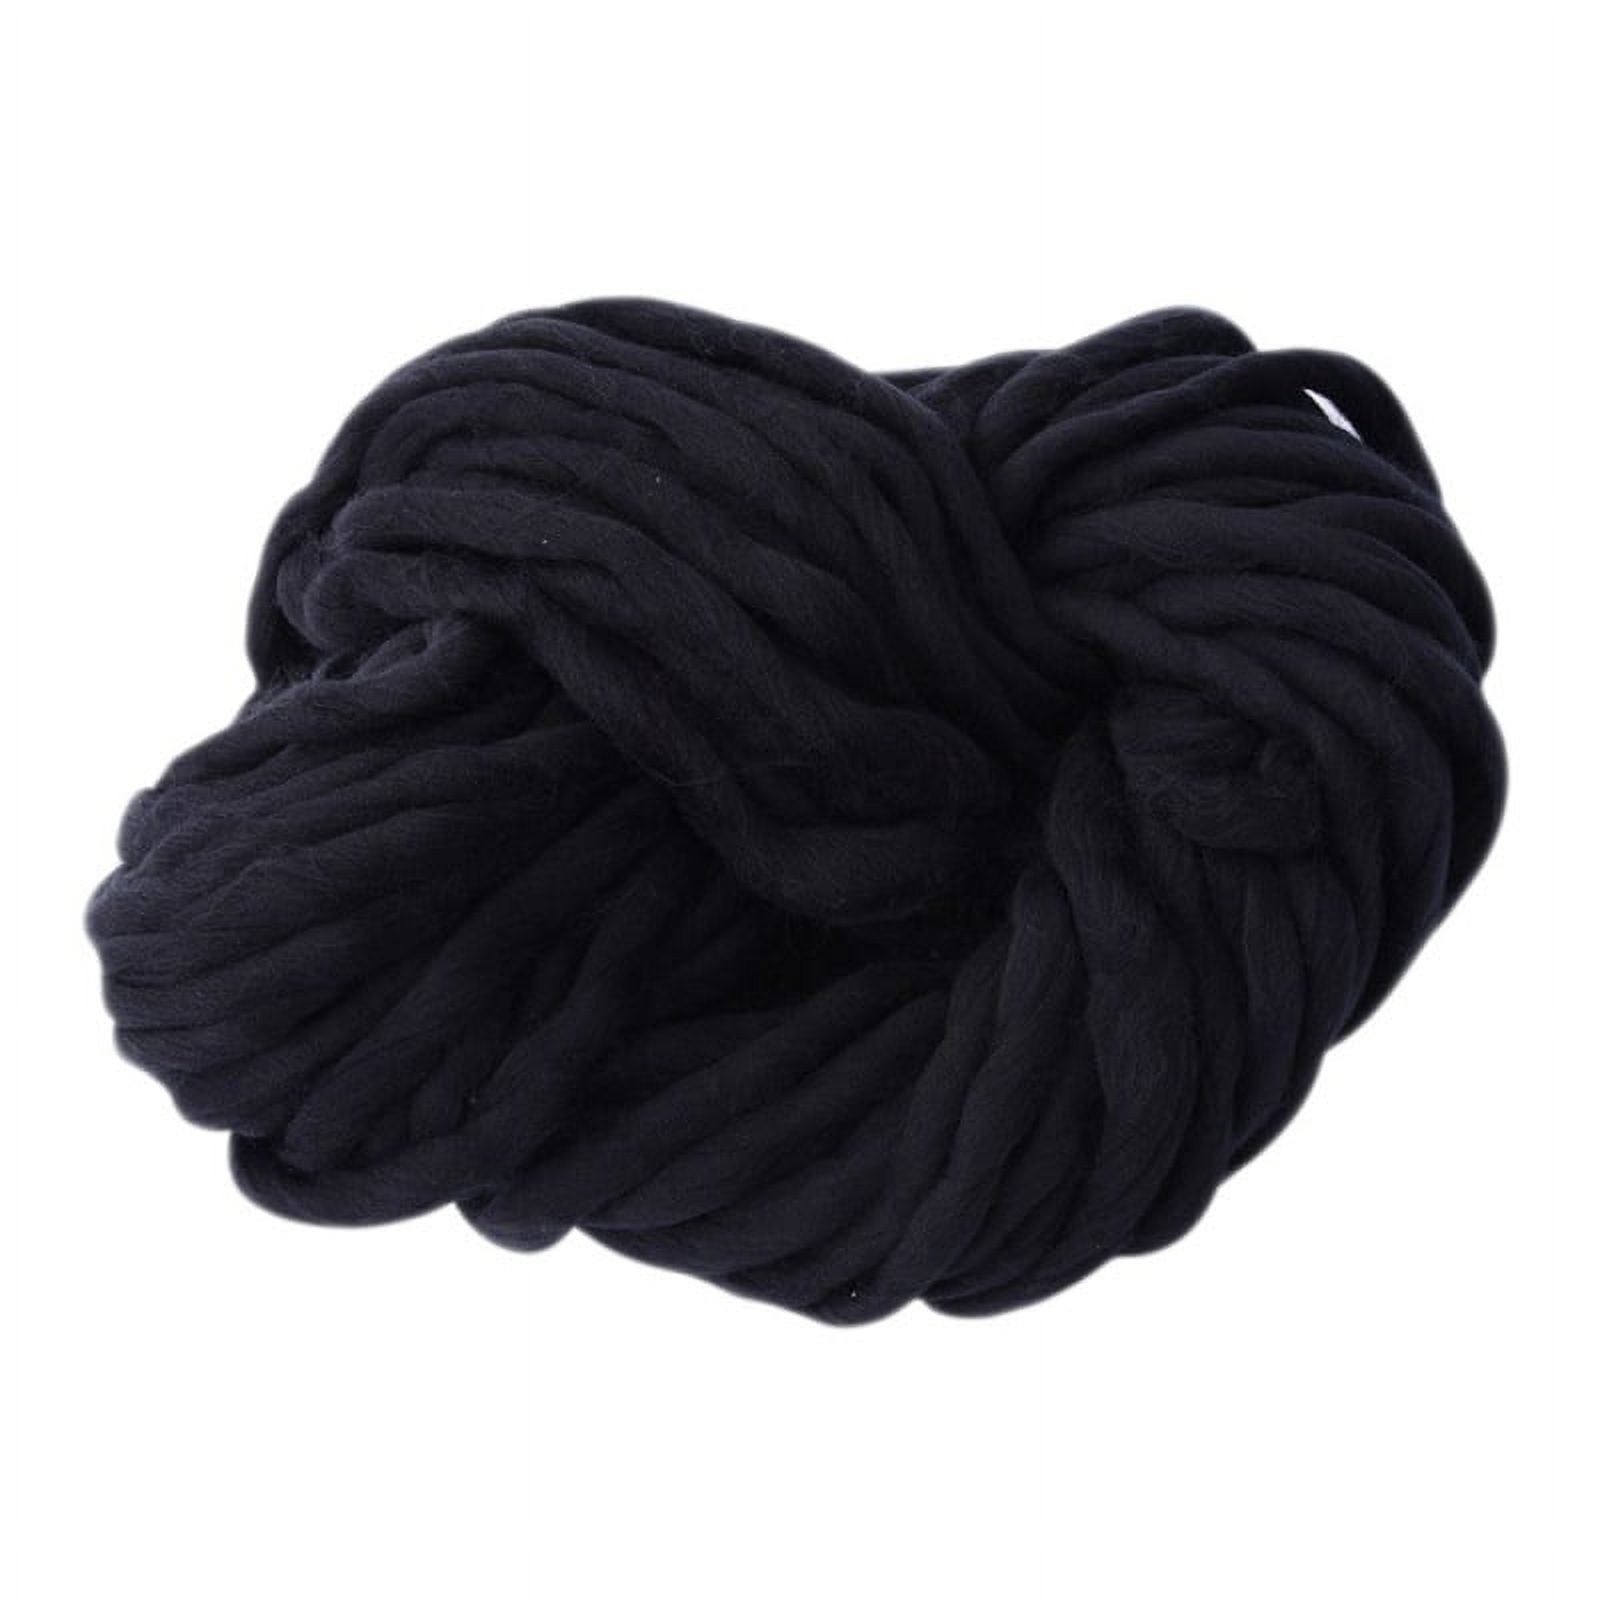 Ombré-Encore Big Bulky #5 Weight Yarn for Knitting & Crocheting Chunky  Blankets, Scarves, Hats, Cowls and Shawls, 3 Balls, 507yds/420g (Black Jade)